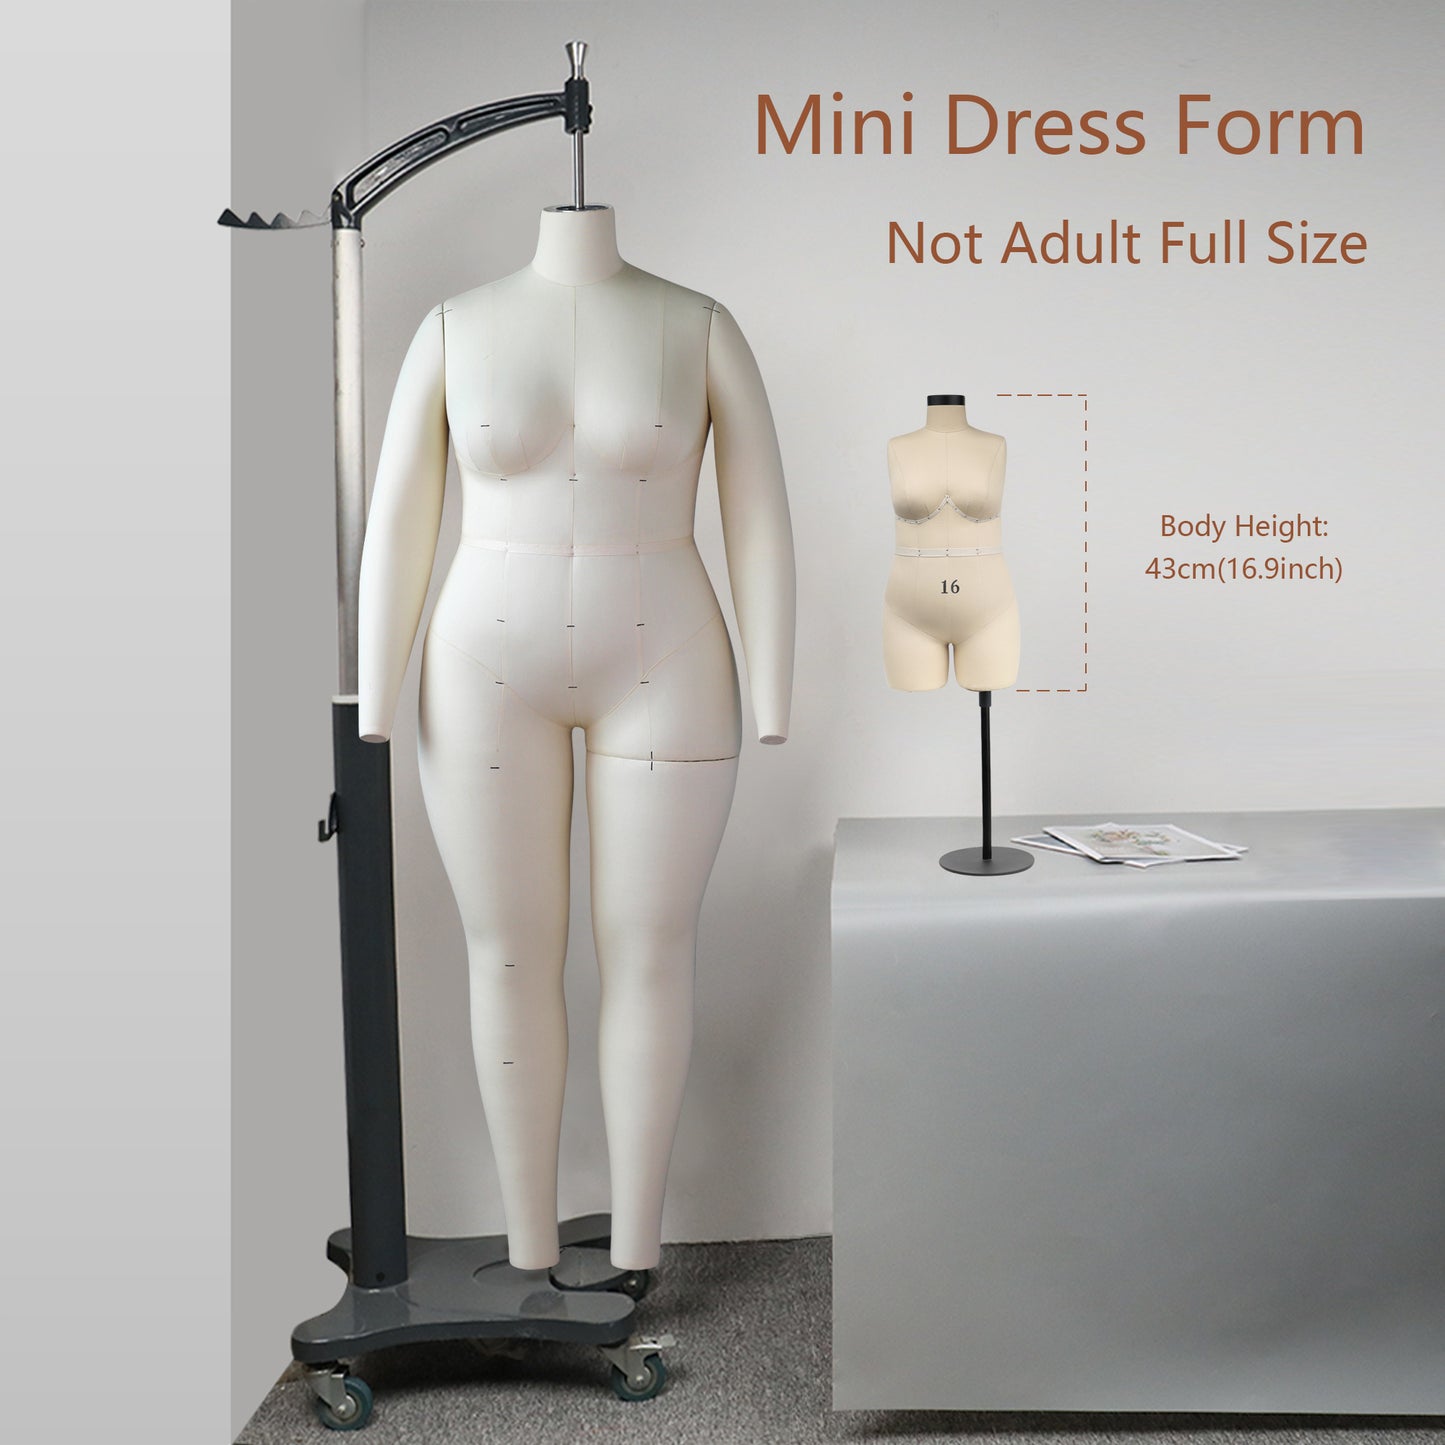 Jelimate Size 16 Female Plus Size Dress Form With Soft Arms,Half Scale Dress Form For Sewing,Mini Lingerie Mannequin Women Plus Size Mannequin